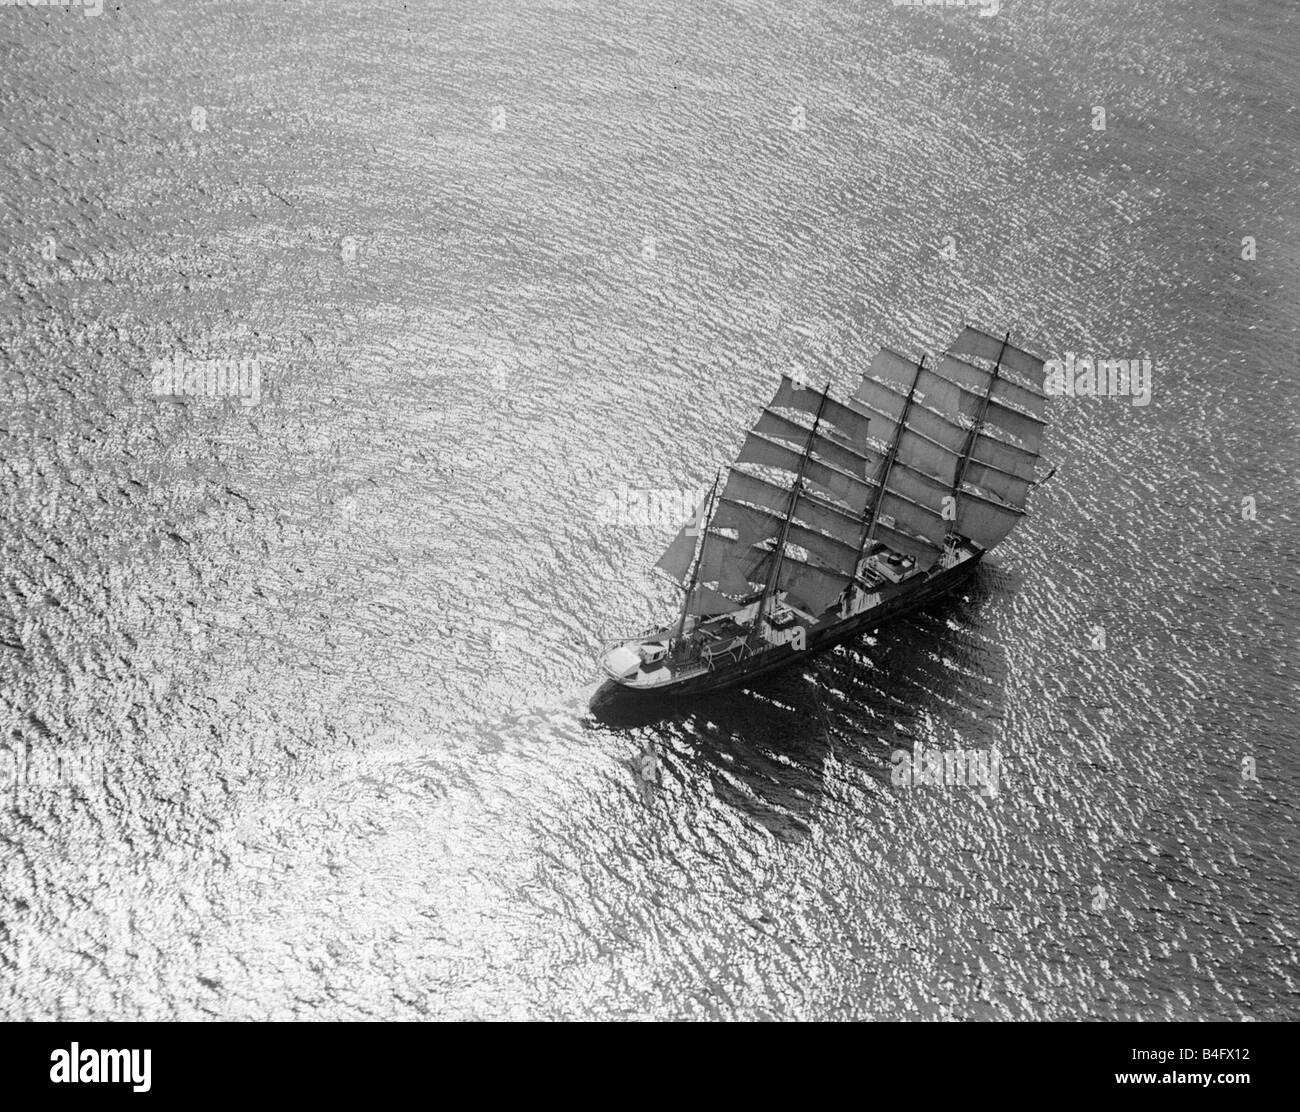 The windjammer Olive Bank in the English Channel Transport Ships Tall Ships  Travel Sailing Sea Shadows Circa 1935 1930s Stock Photo - Alamy